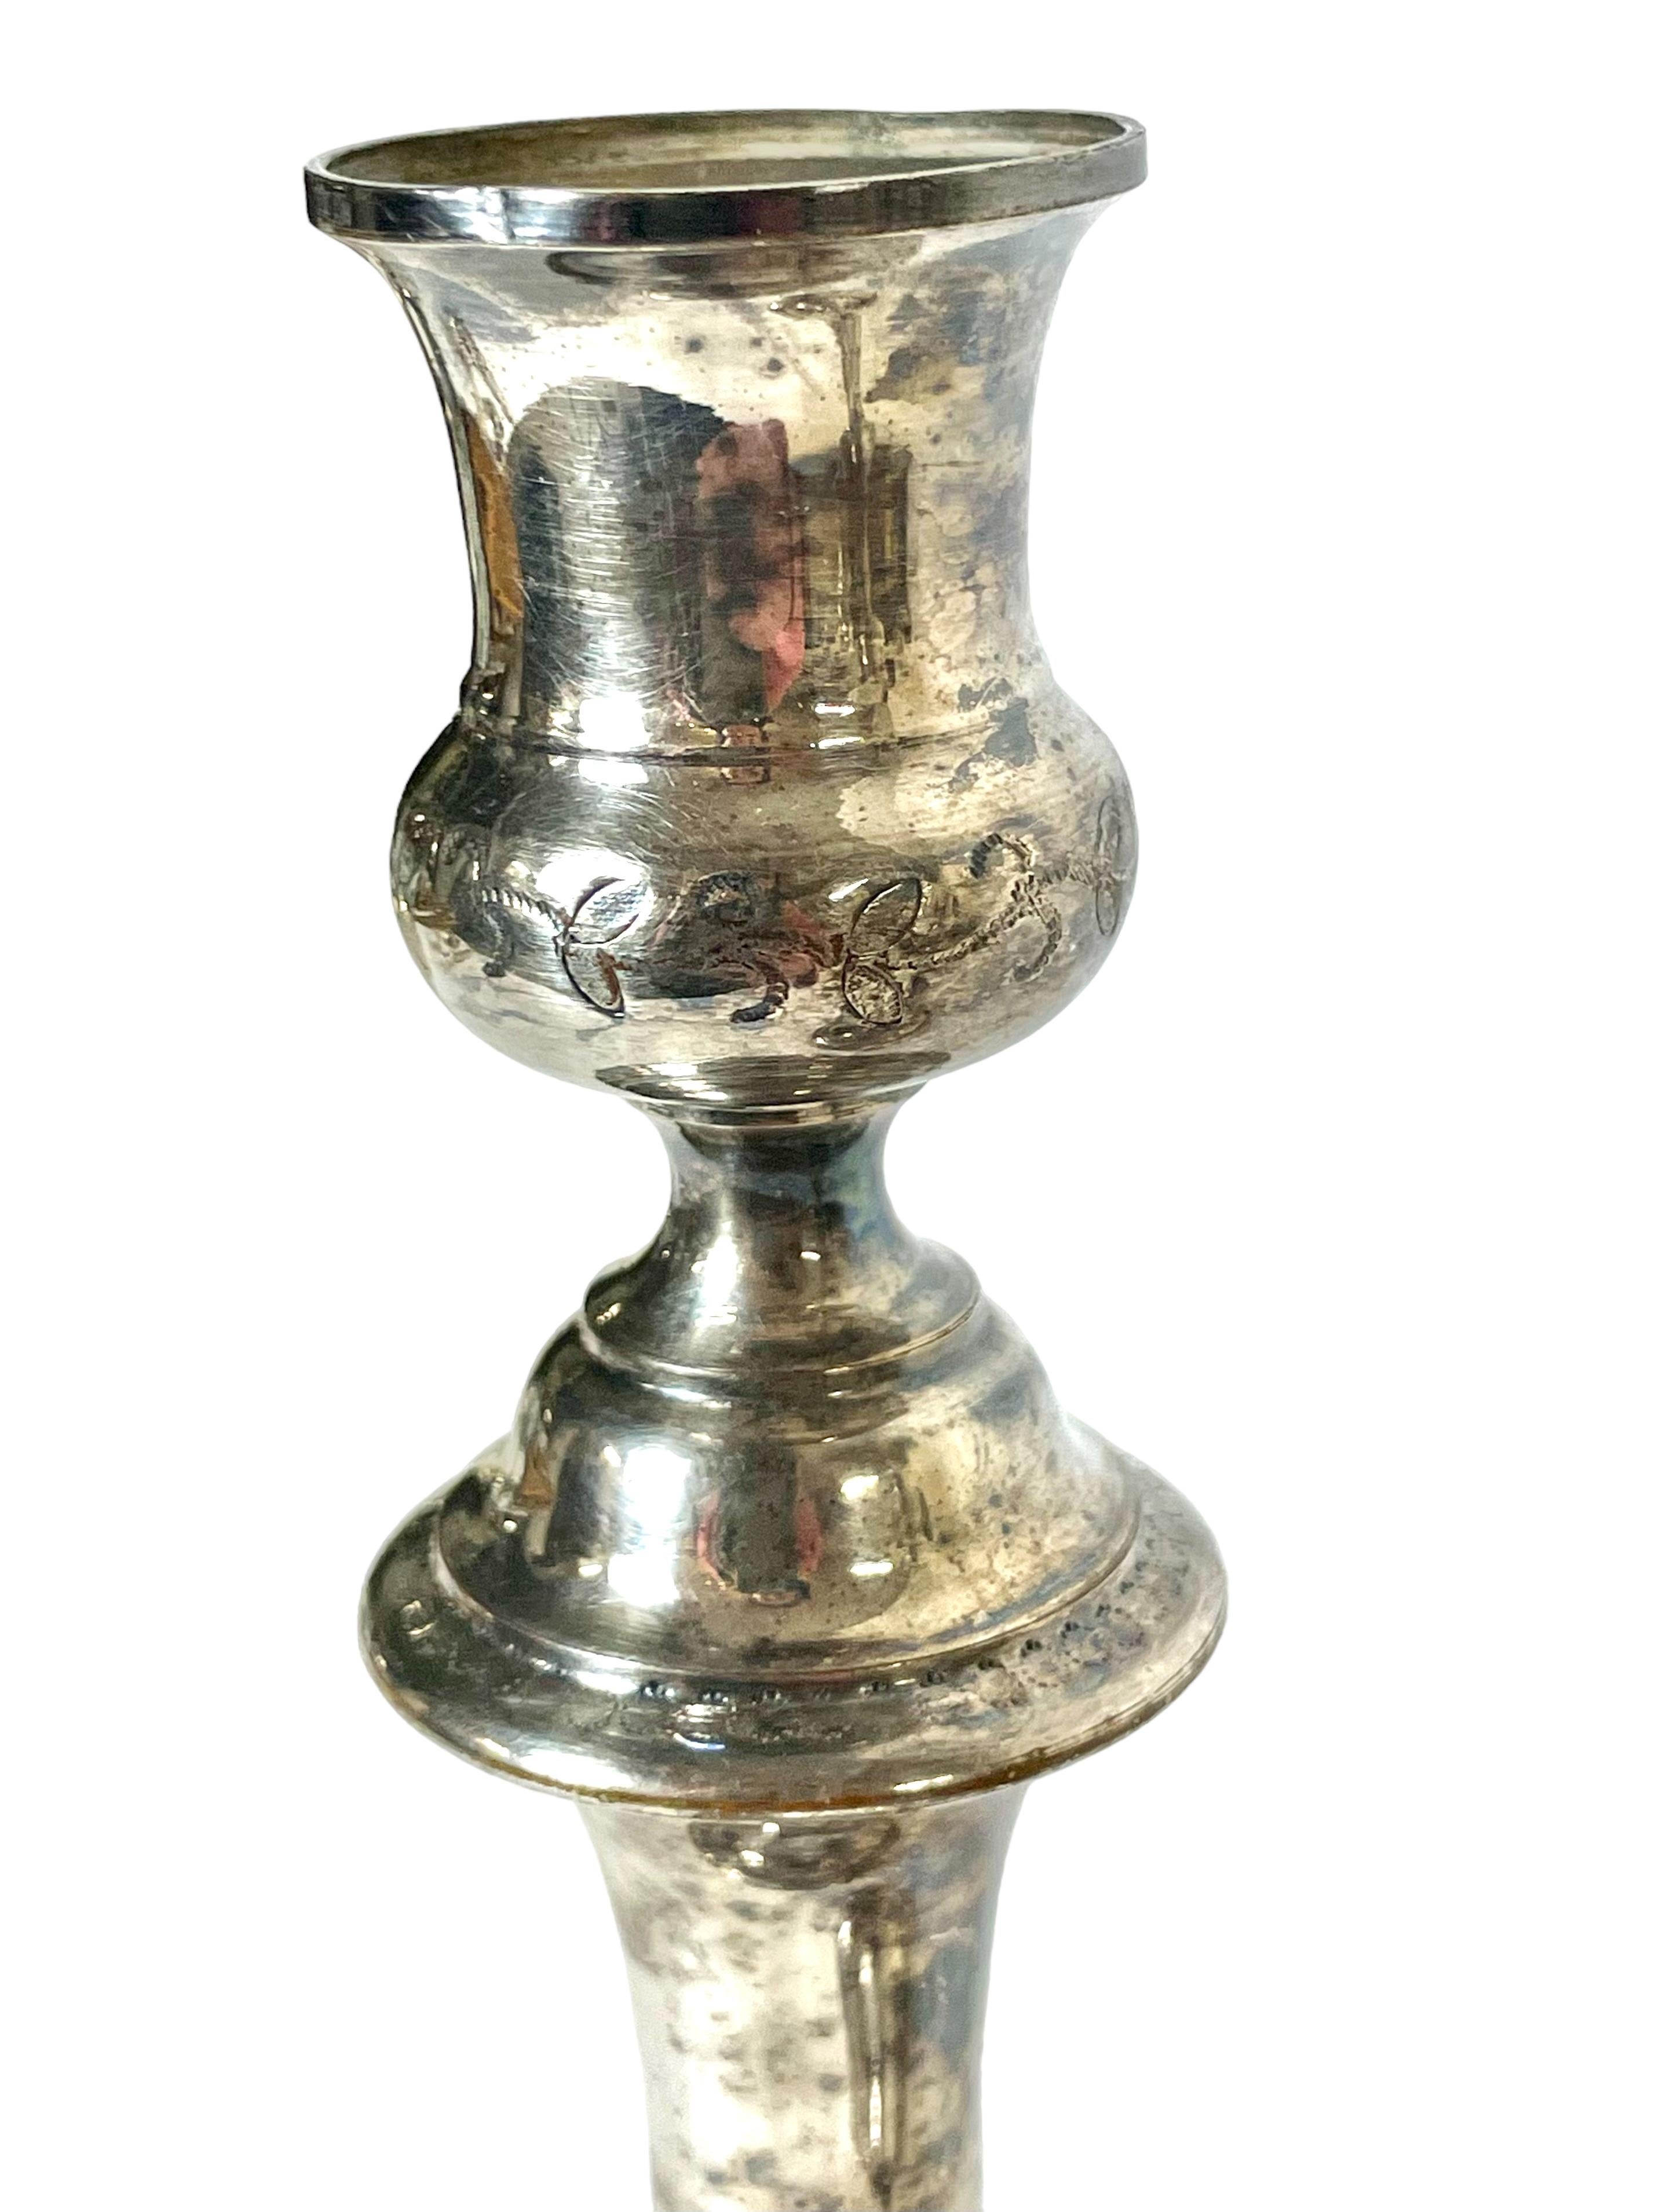 An exceptionally fine pair of silver-plated candlesticks by renowned silversmiths Cailar Bayard. Founded in Paris by Noël Cailar and Pierre Bayard, the firm produced top-notch silverware from 1845 until they closed in 1934. This beautiful example of